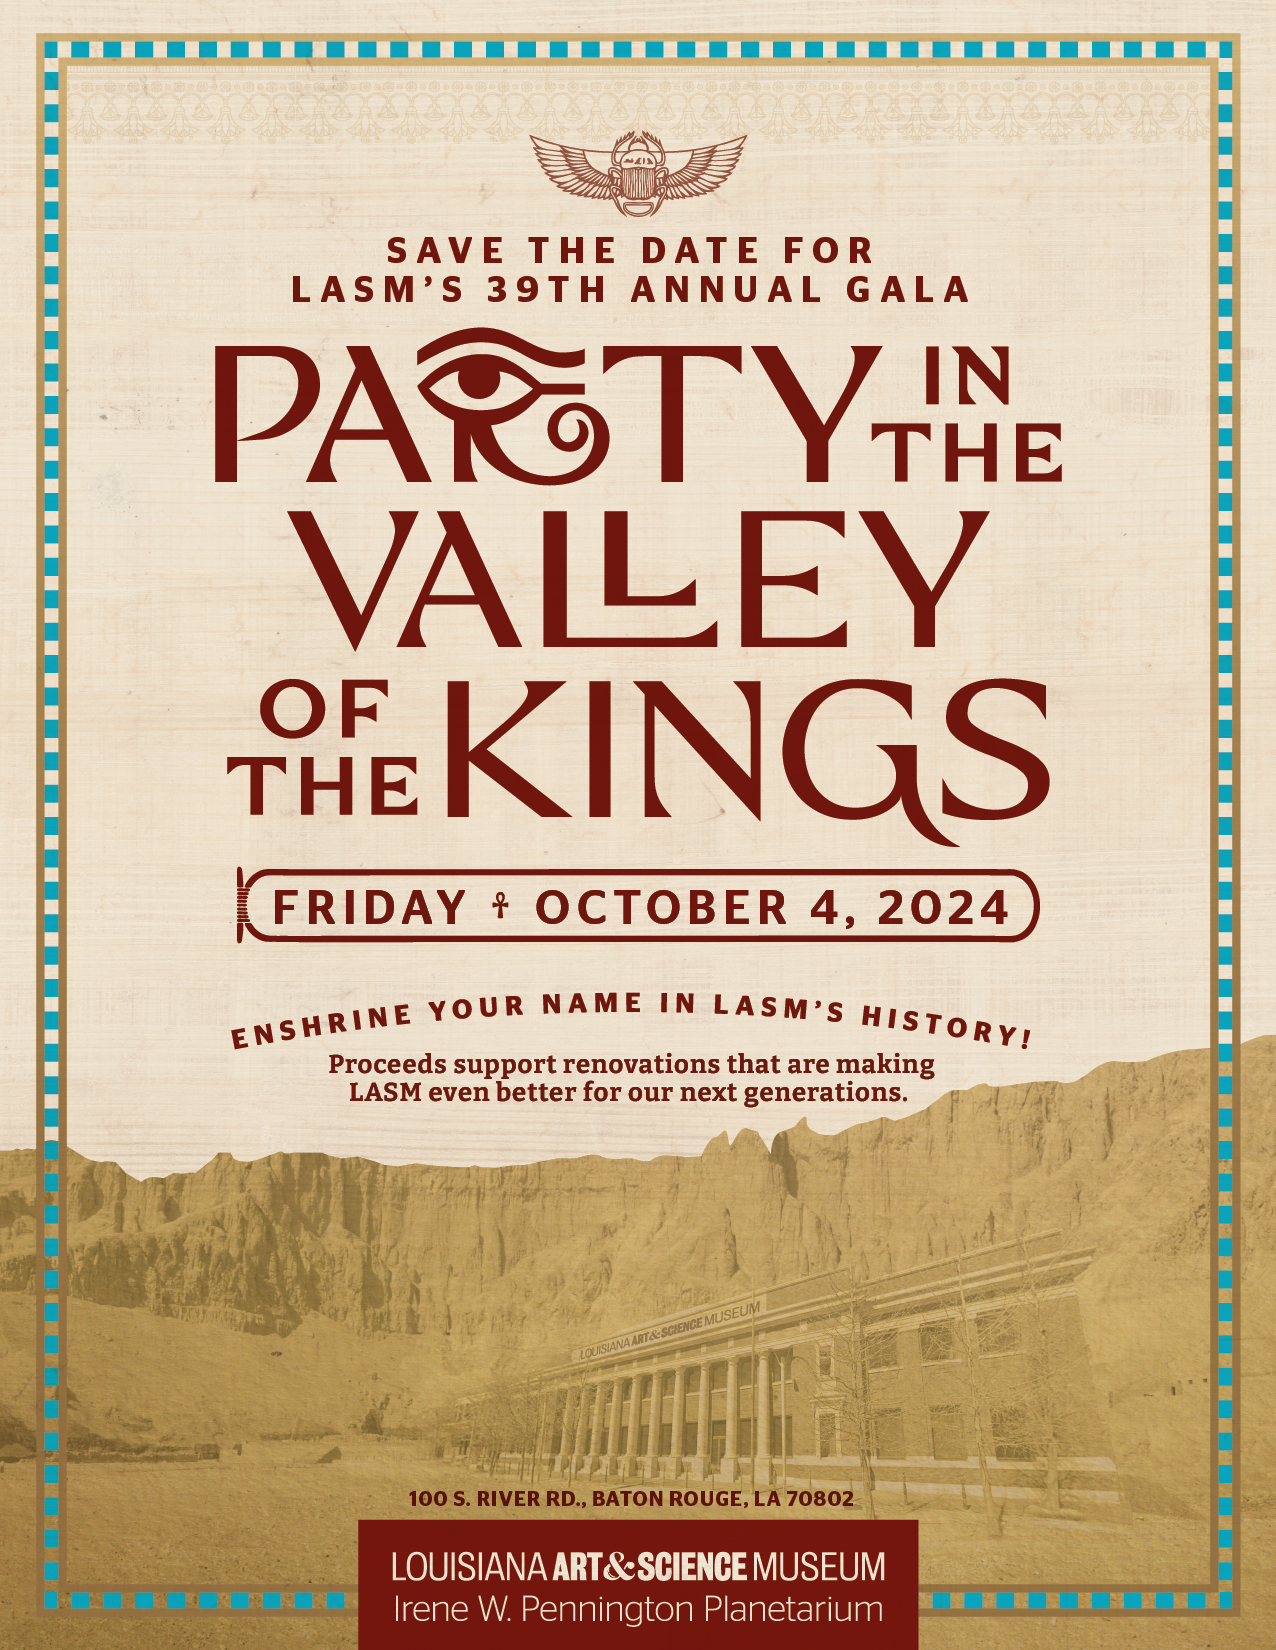 LASM's 39th Annual Gala: Party in the Valley of the Kings Save the Date